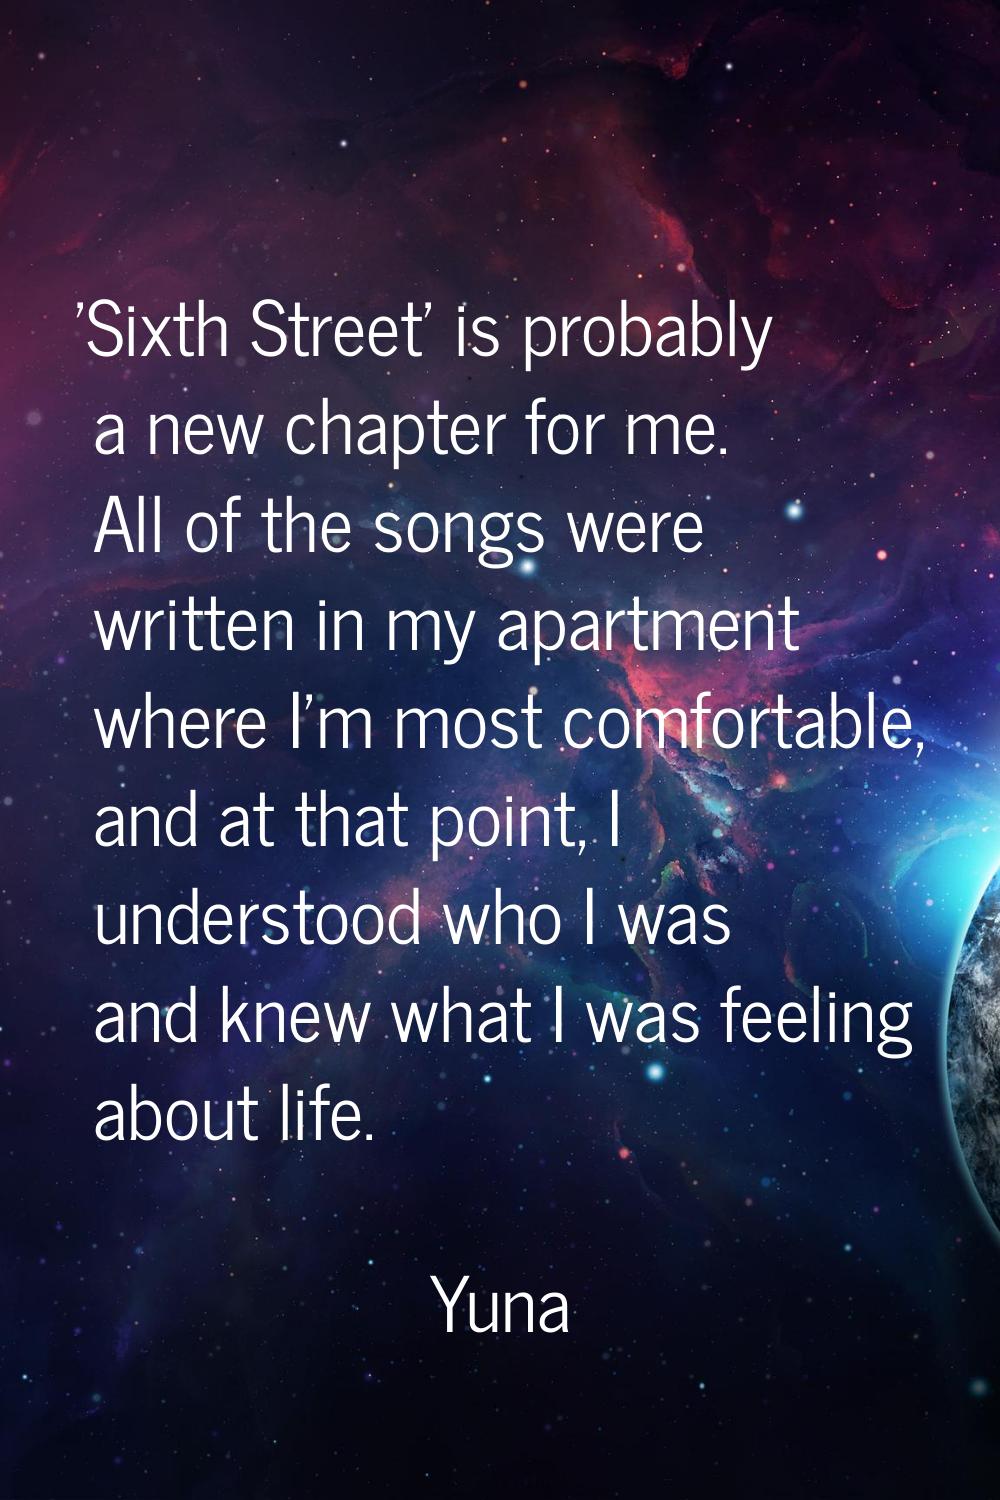 'Sixth Street' is probably a new chapter for me. All of the songs were written in my apartment wher